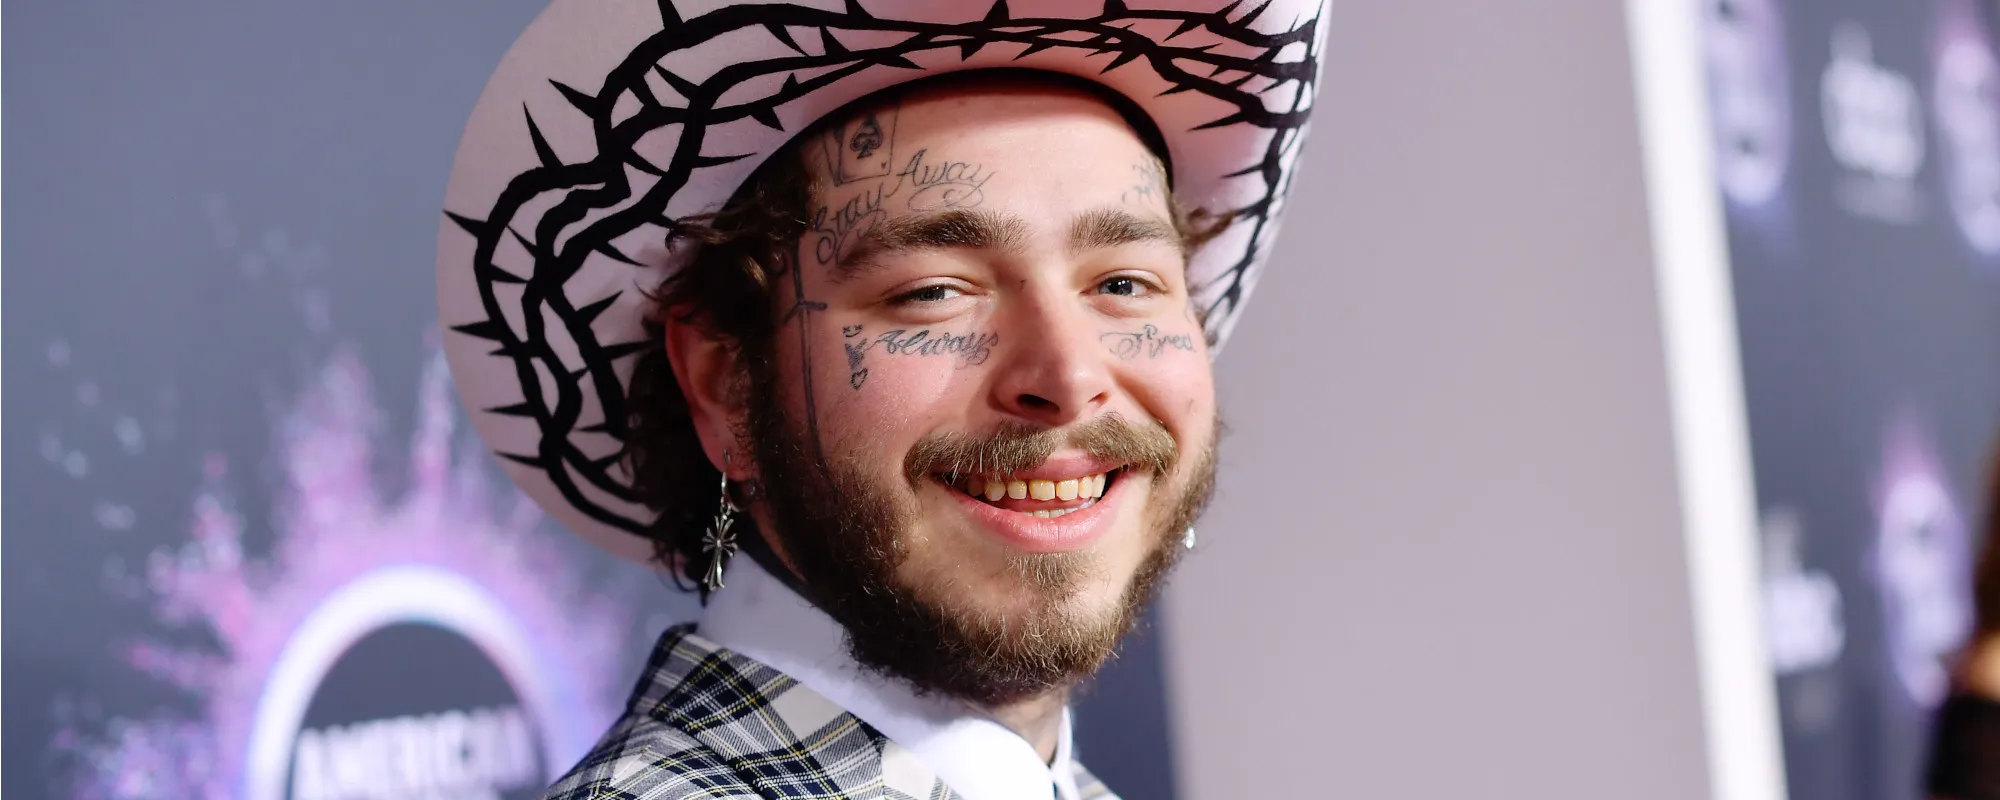 Watch Post Malone Sing Joyful Tribute to Toby Keith—”Courtesy of the Red, White, and Blue (The Angry American)”